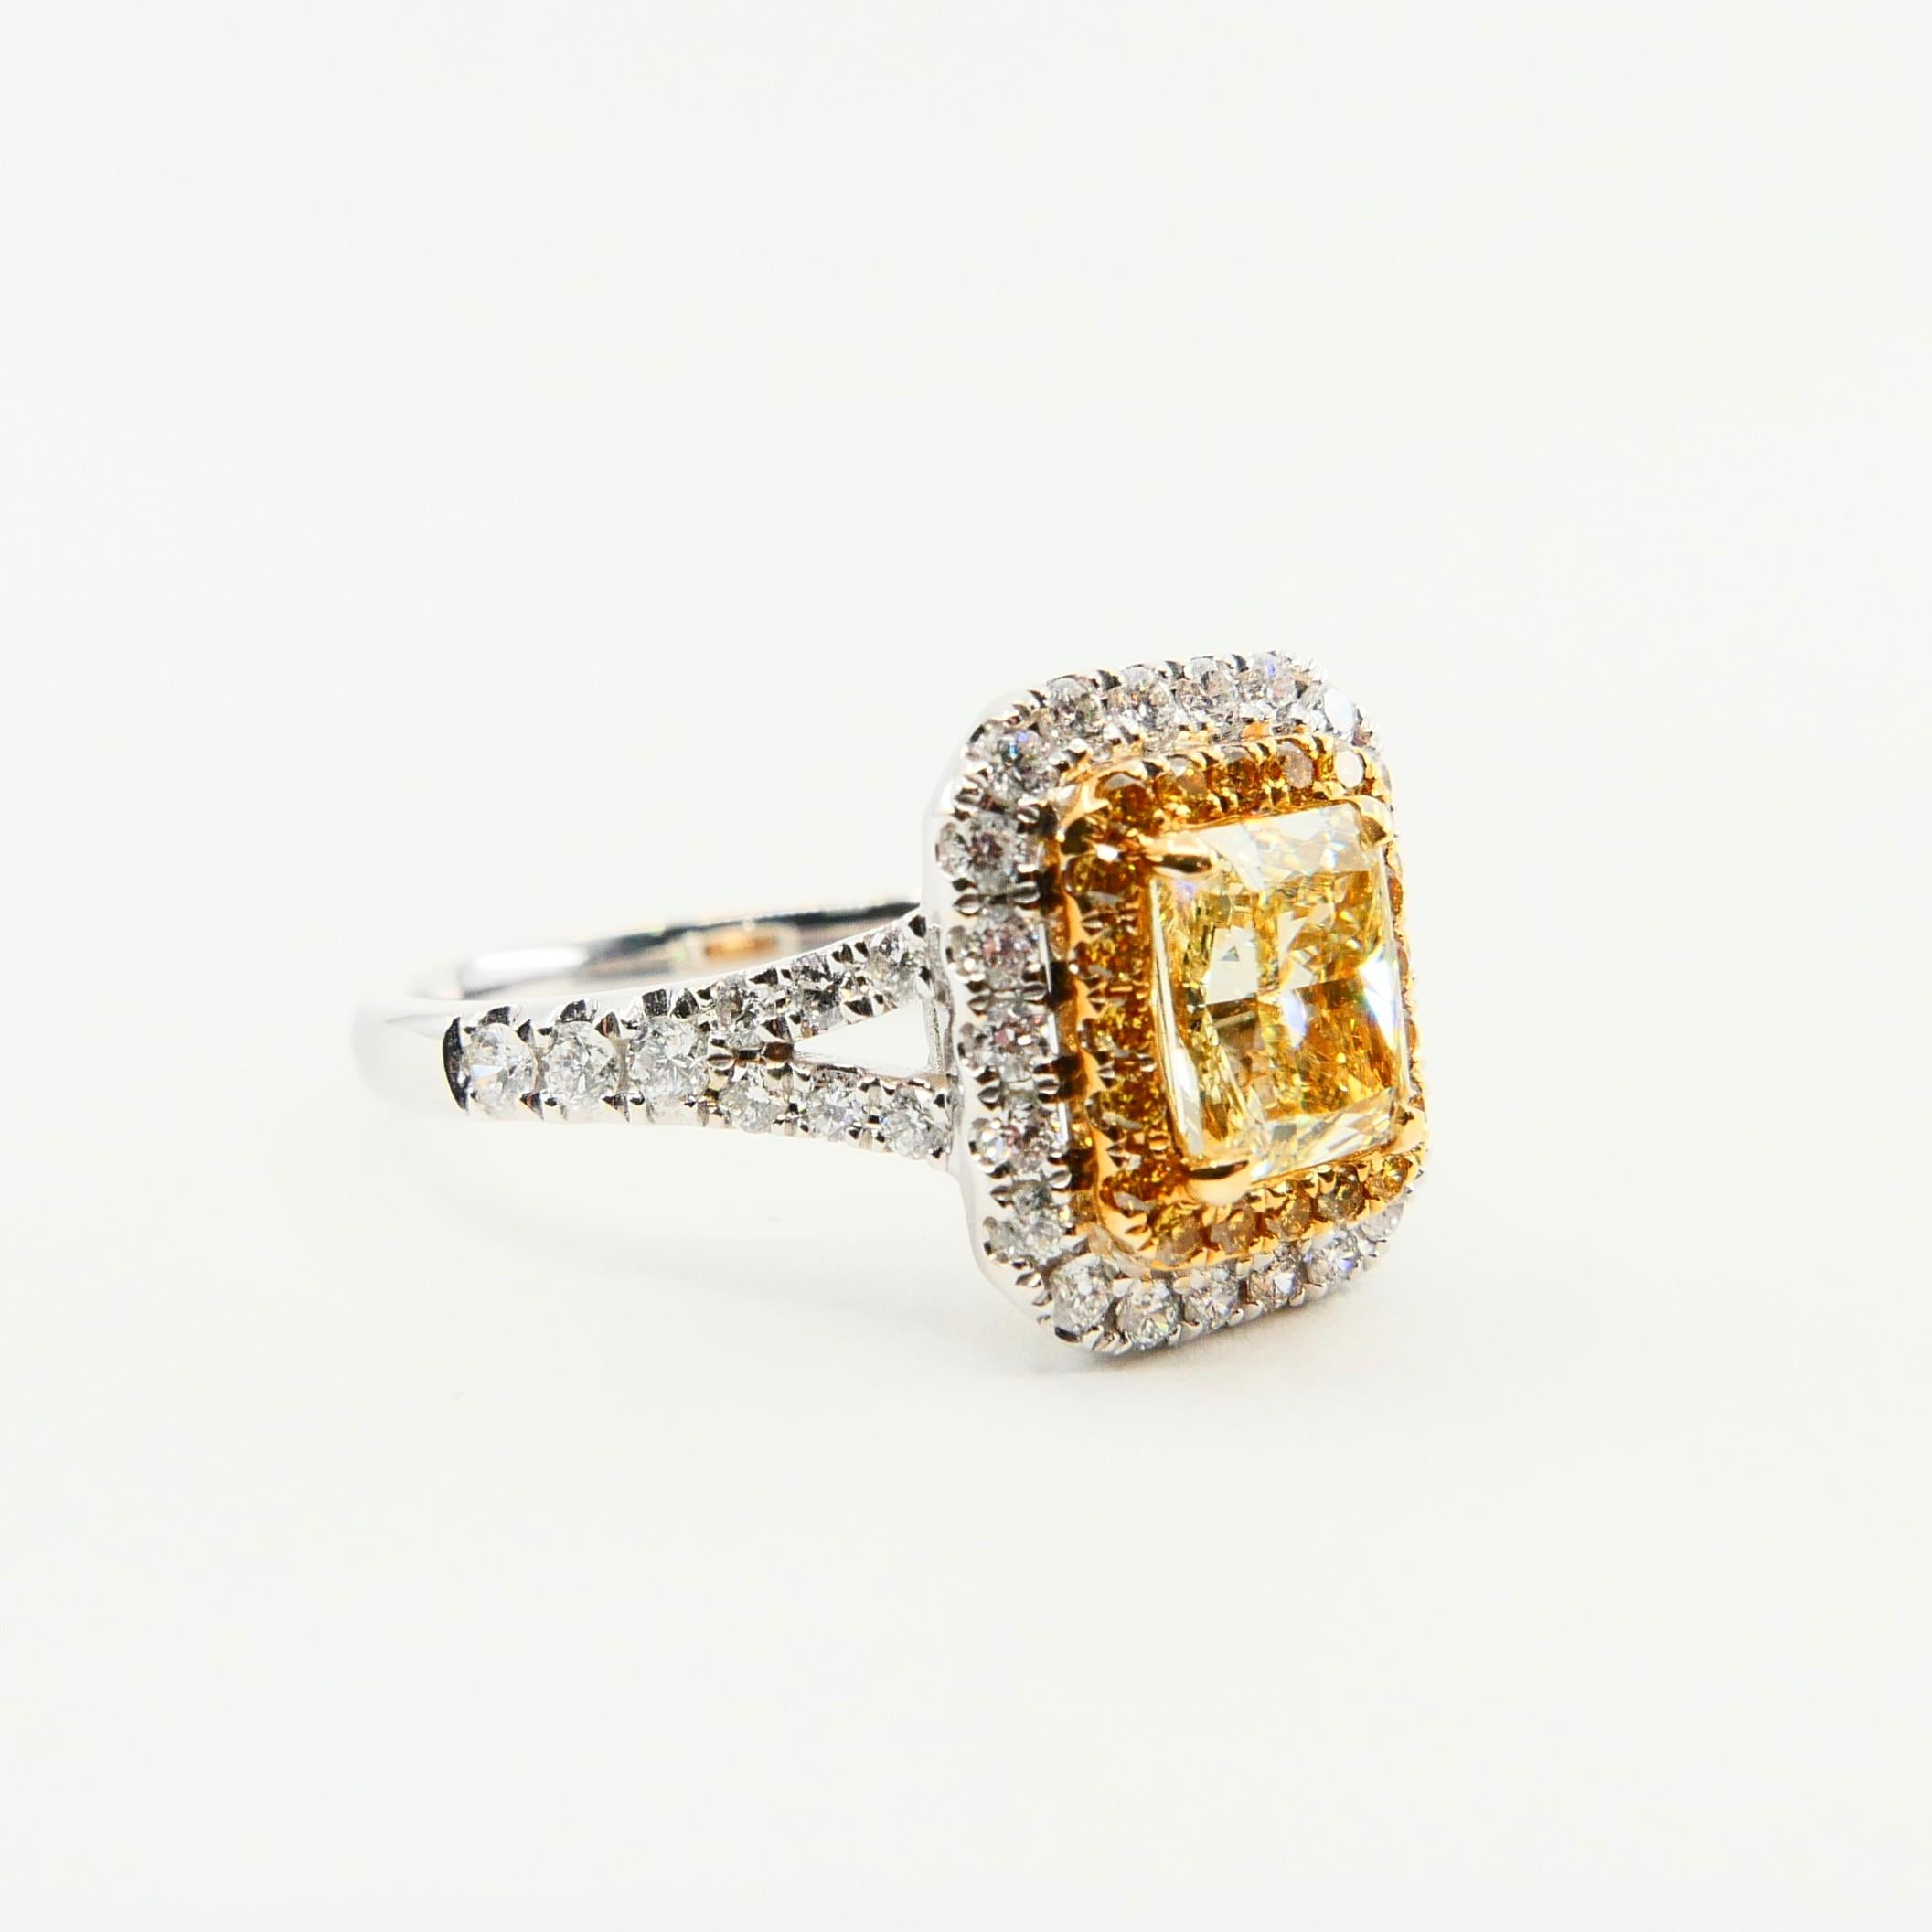 GIA Certified 1.06 Carat Cape Yellow Diamond Cocktail Ring, Double Halo Setting For Sale 5